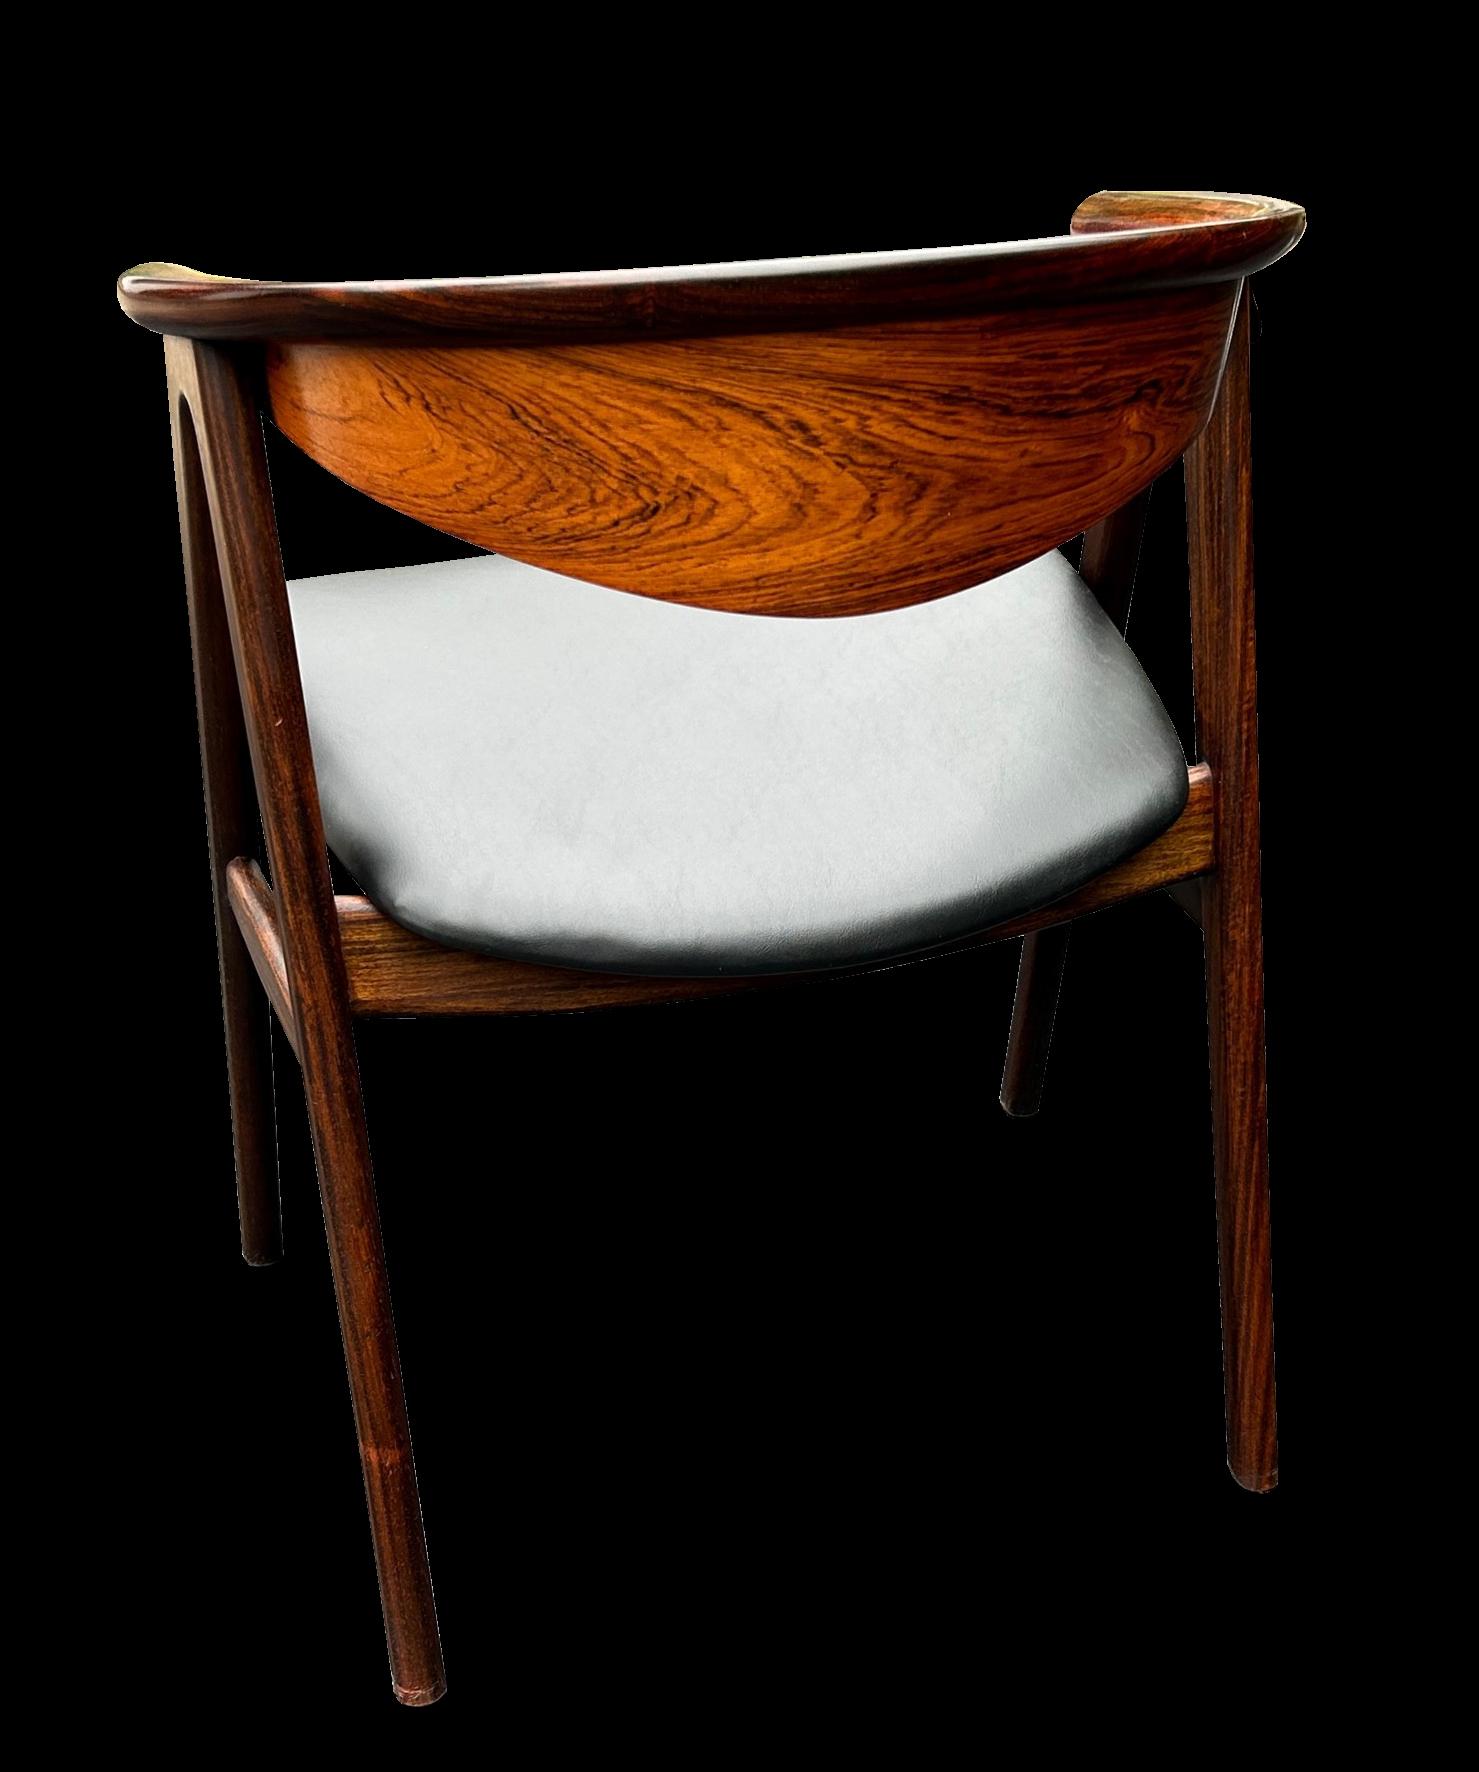 This is a particularly good example of this scarce chair by Erik Kirkegaard , it has beautifully marked grain on the solid rosewood used to make it, and it is in fantastic condition.
